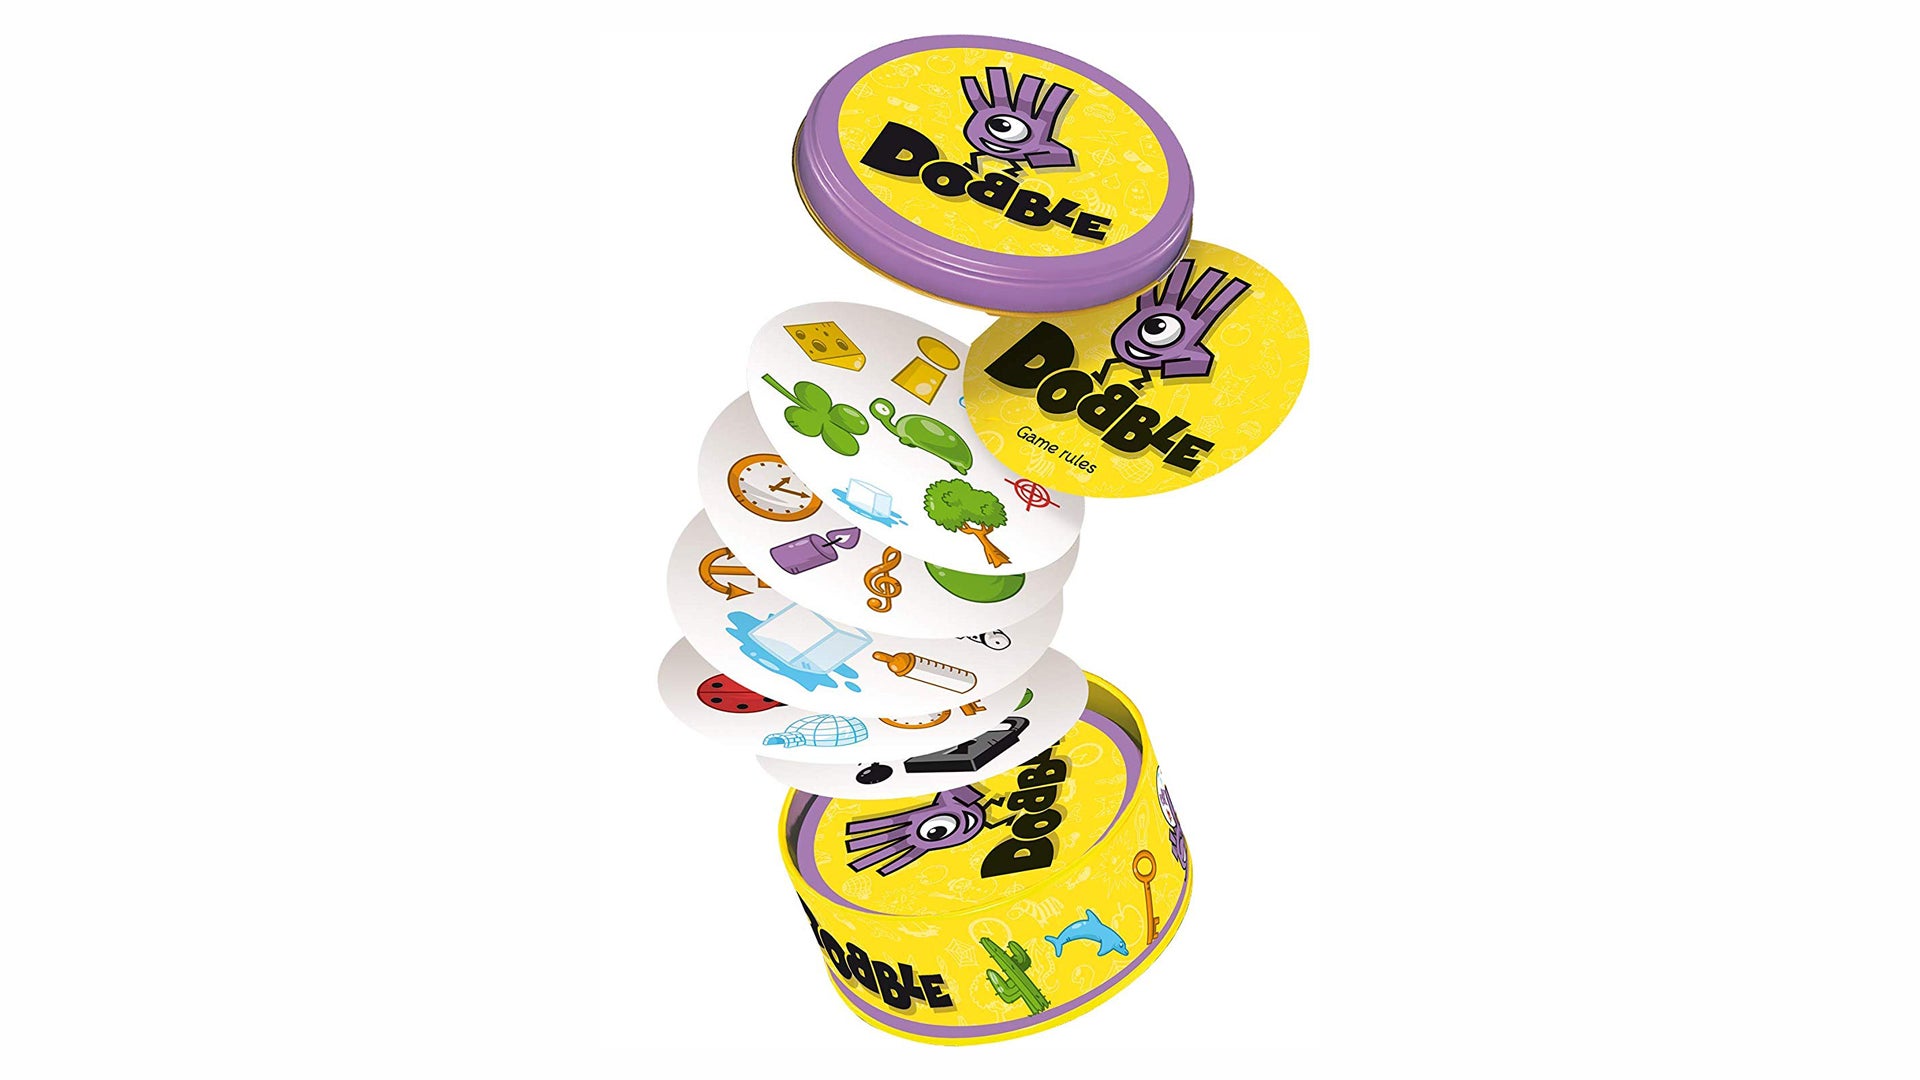 Dobble board game cards